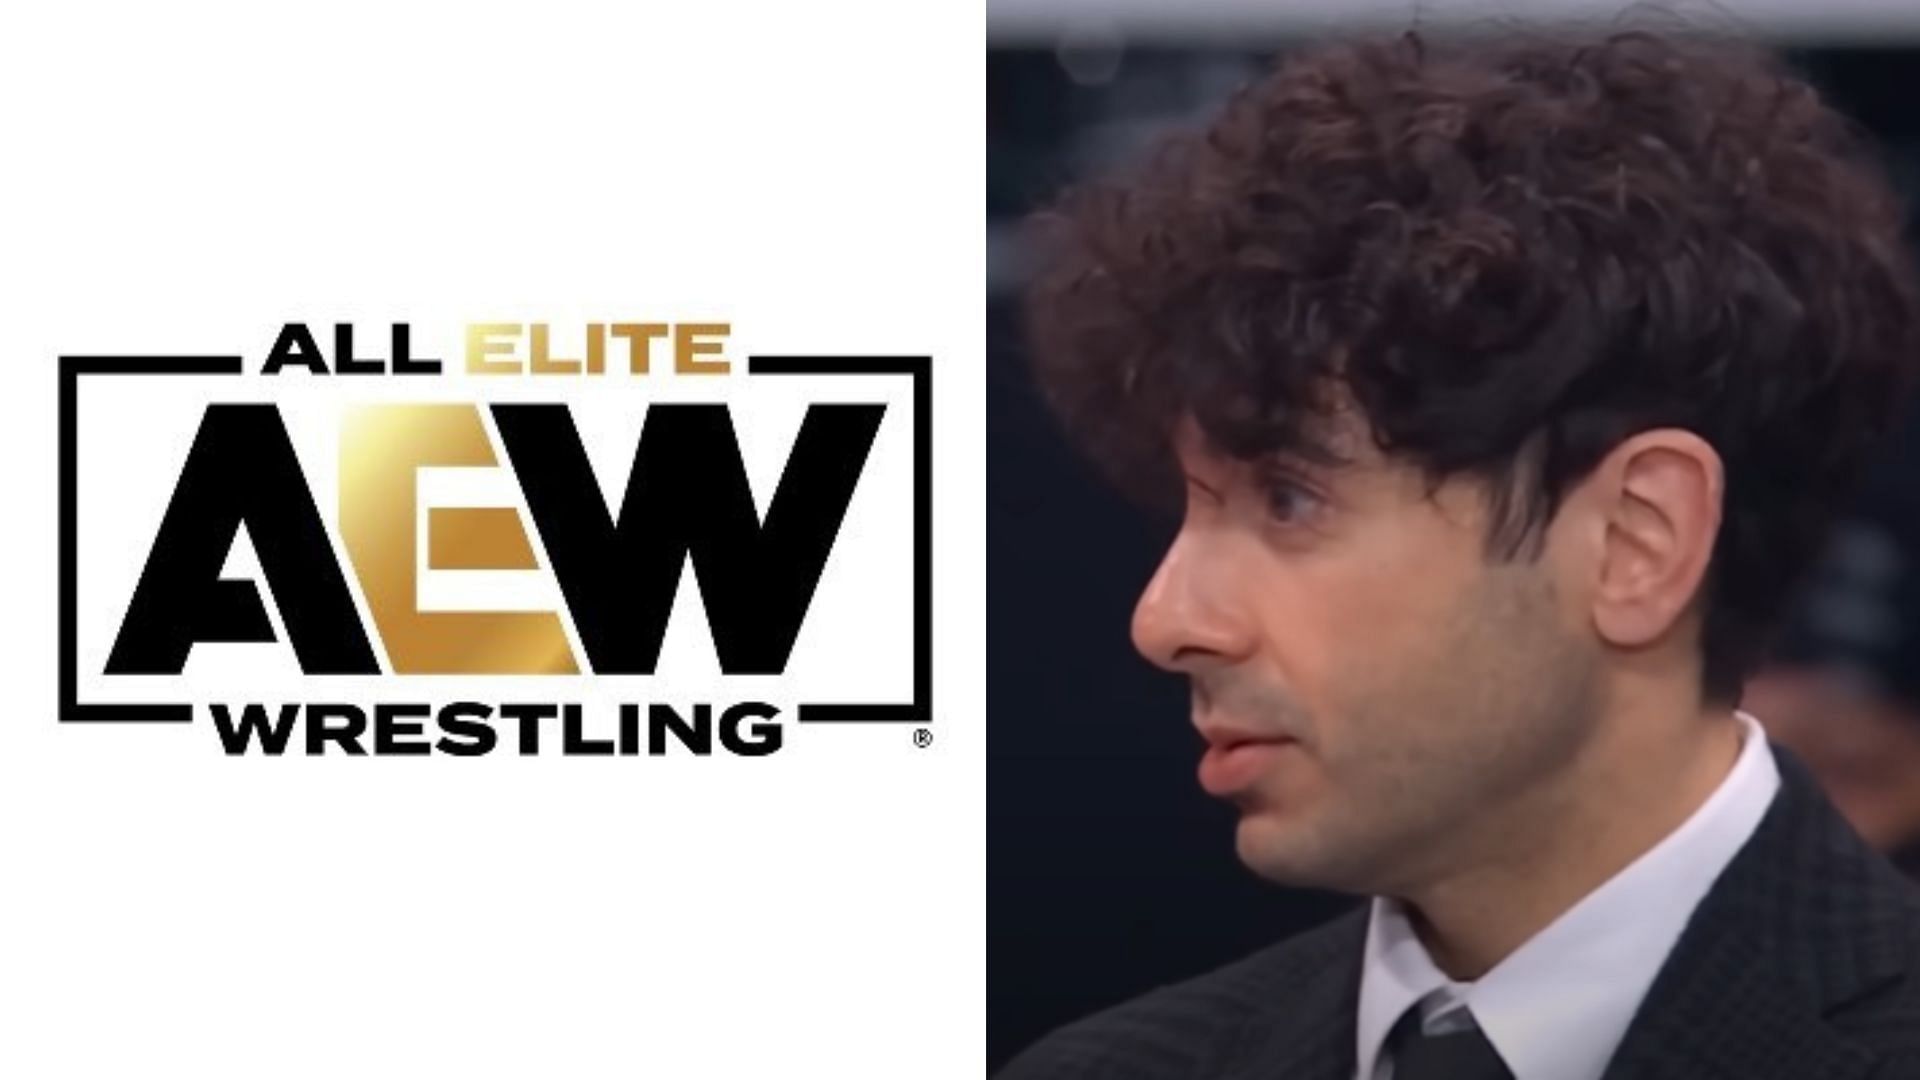 Tony Khan is the main booker and President of AEW [Image Credits; AEW